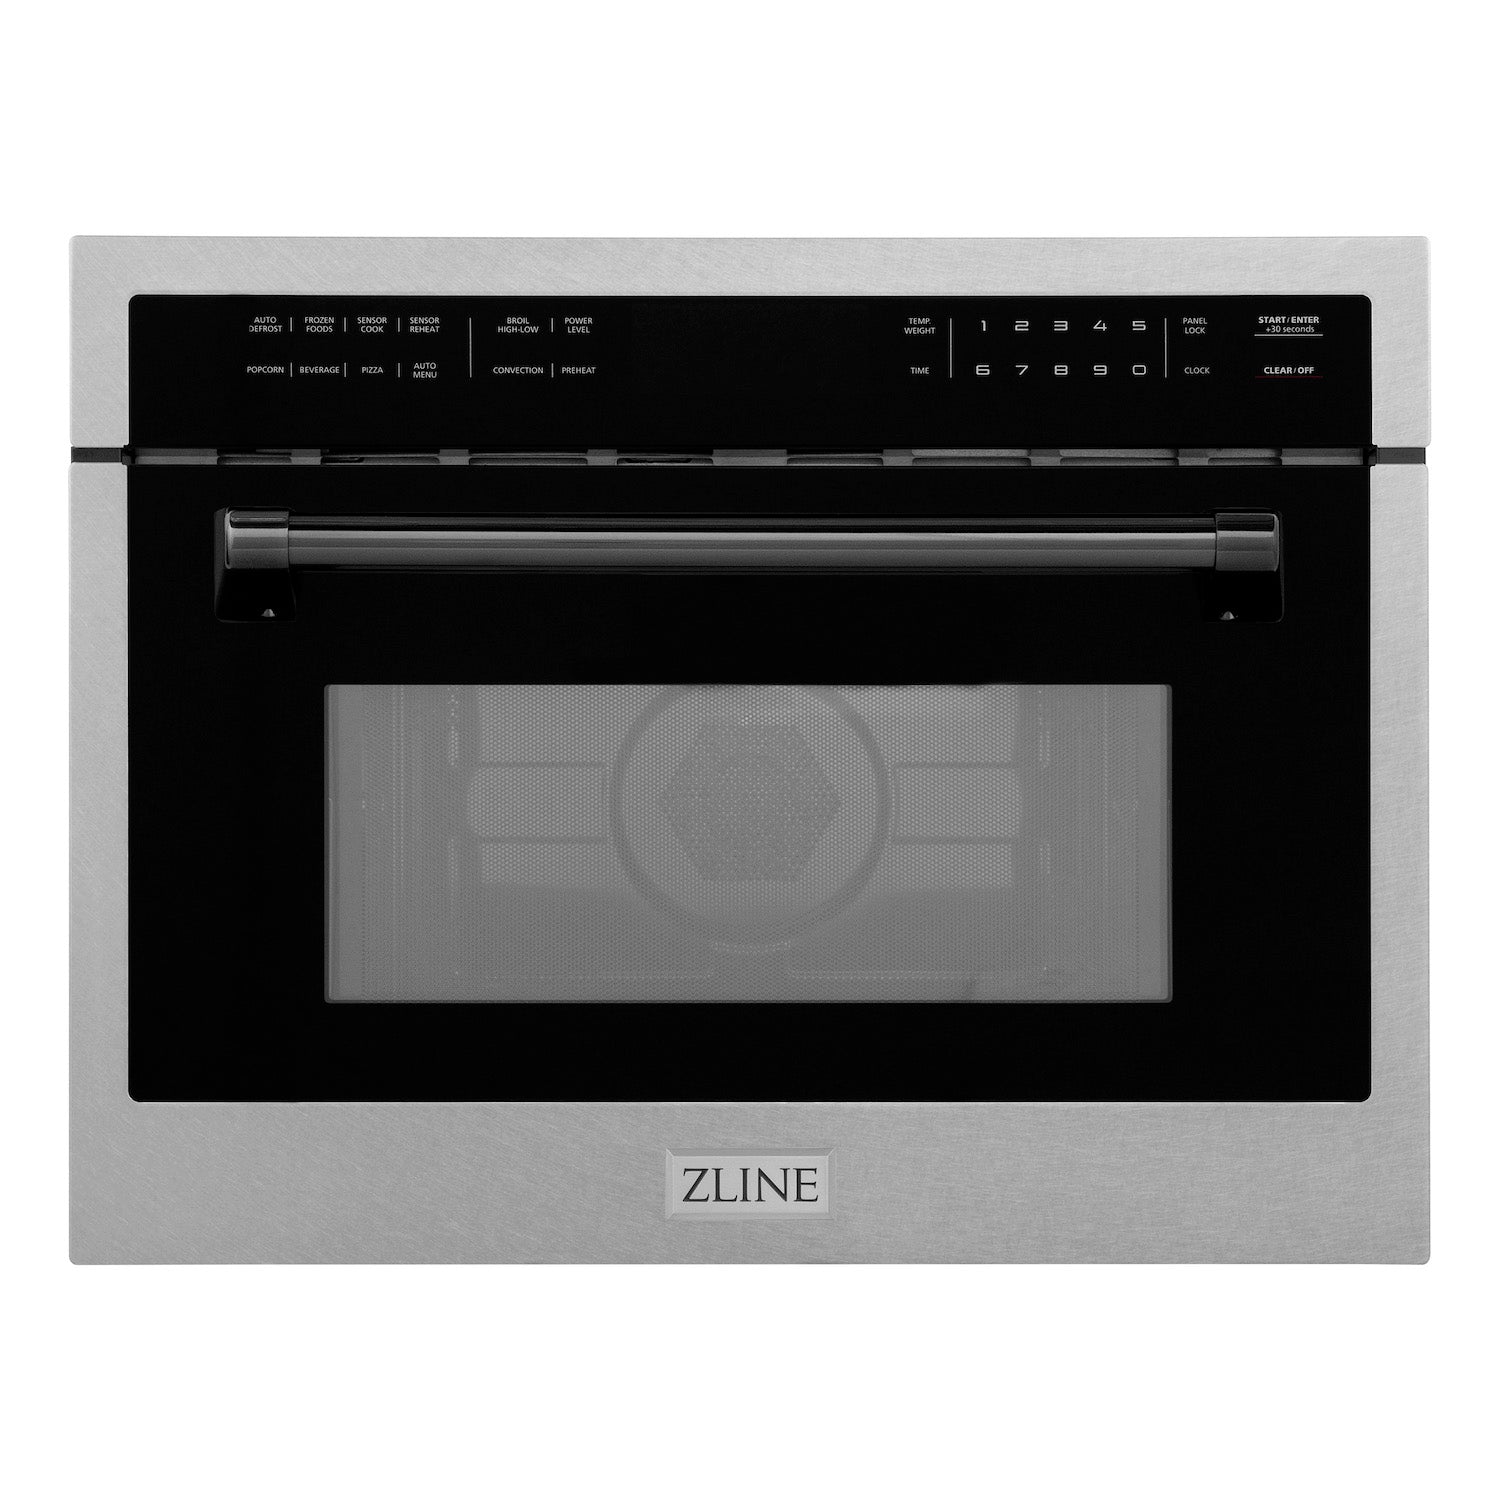 ZLINE Autograph Edition 24 in. 1.6 cu ft. Built-in Convection Microwave Oven in DuraSnow Stainless Steel with Matte Black Accents front with door closed.